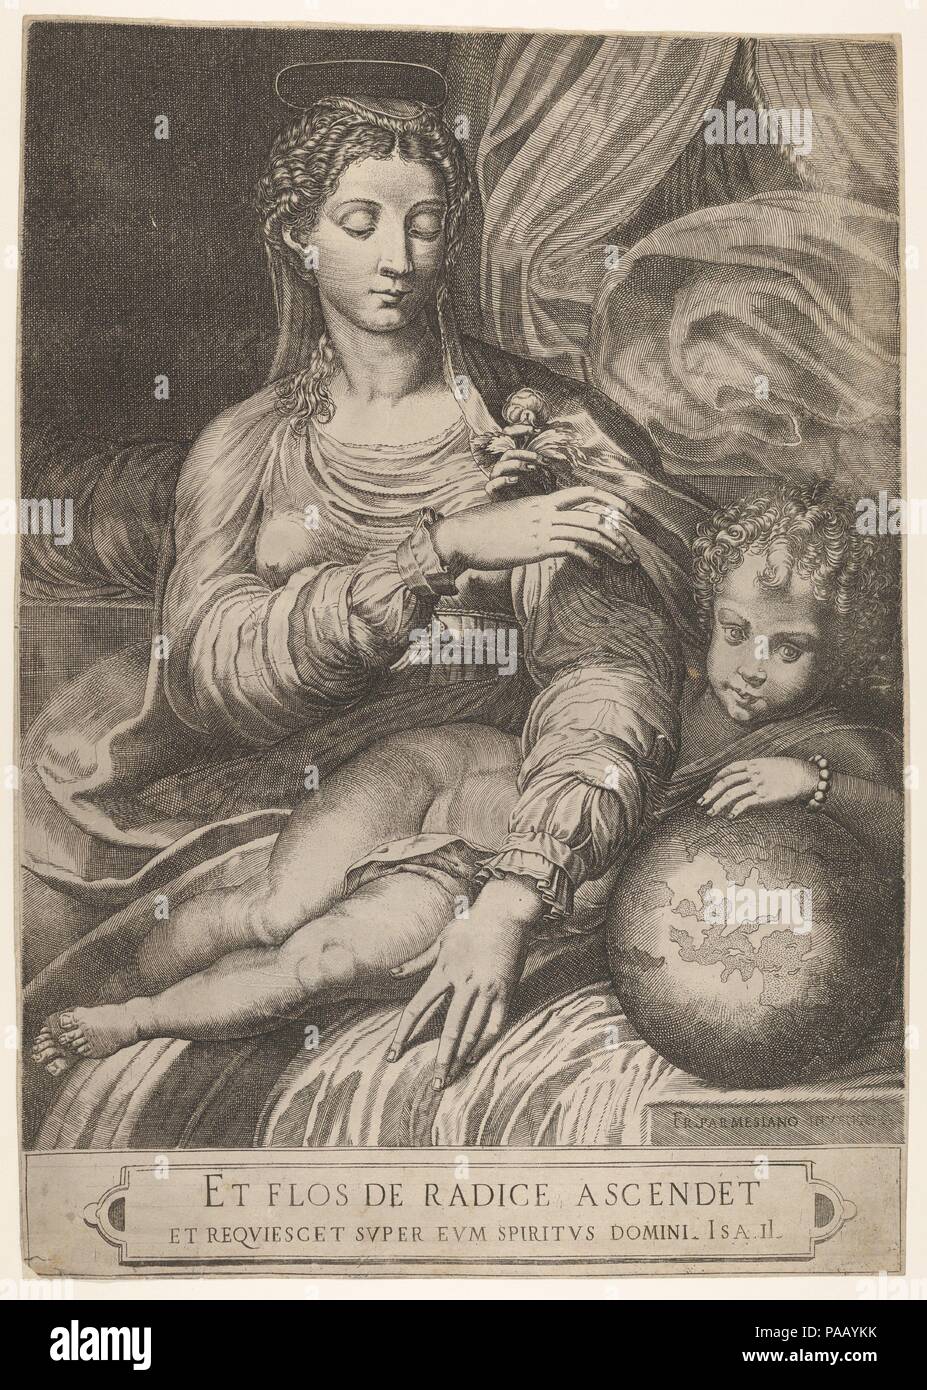 Madonna of the Rose, the Madonna reaches for a rose upheld by the child, who reclines on a drapery and rests his left arm on a globe. Artist: After Parmigianino (Girolamo Francesco Maria Mazzola) (Italian, Parma 1503-1540 Casalmaggiore); Domenico Tibaldi (Italian, 1541-1583 (active Bologna)). Dimensions: Sheet: 18 11/16 x 13 5/16 in. (47.5 x 33.8 cm). Date: 1516. Museum: Metropolitan Museum of Art, New York, USA. Stock Photo